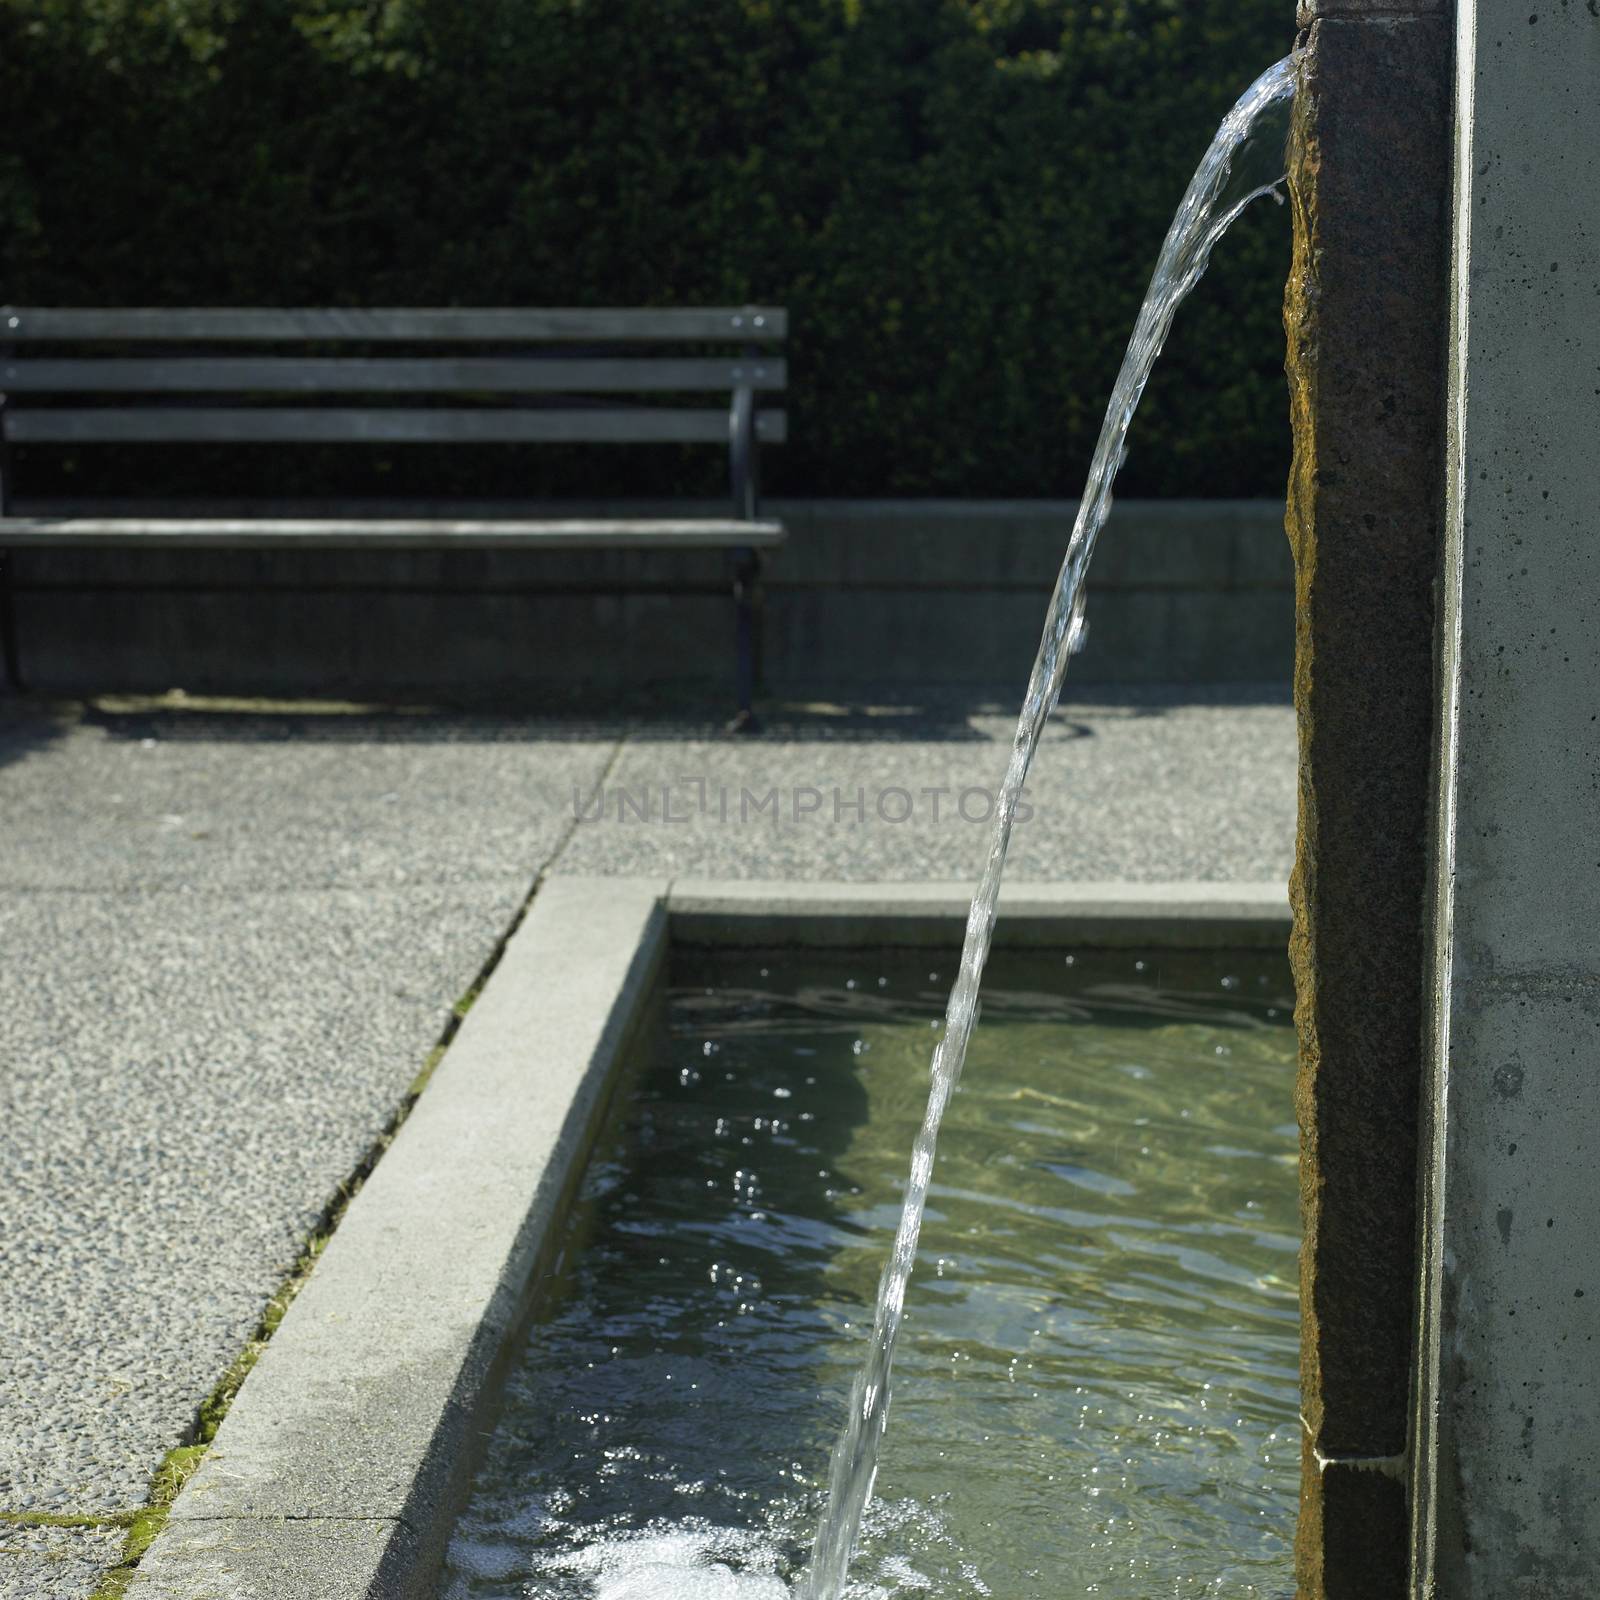 Water spout pours into an urban water feature